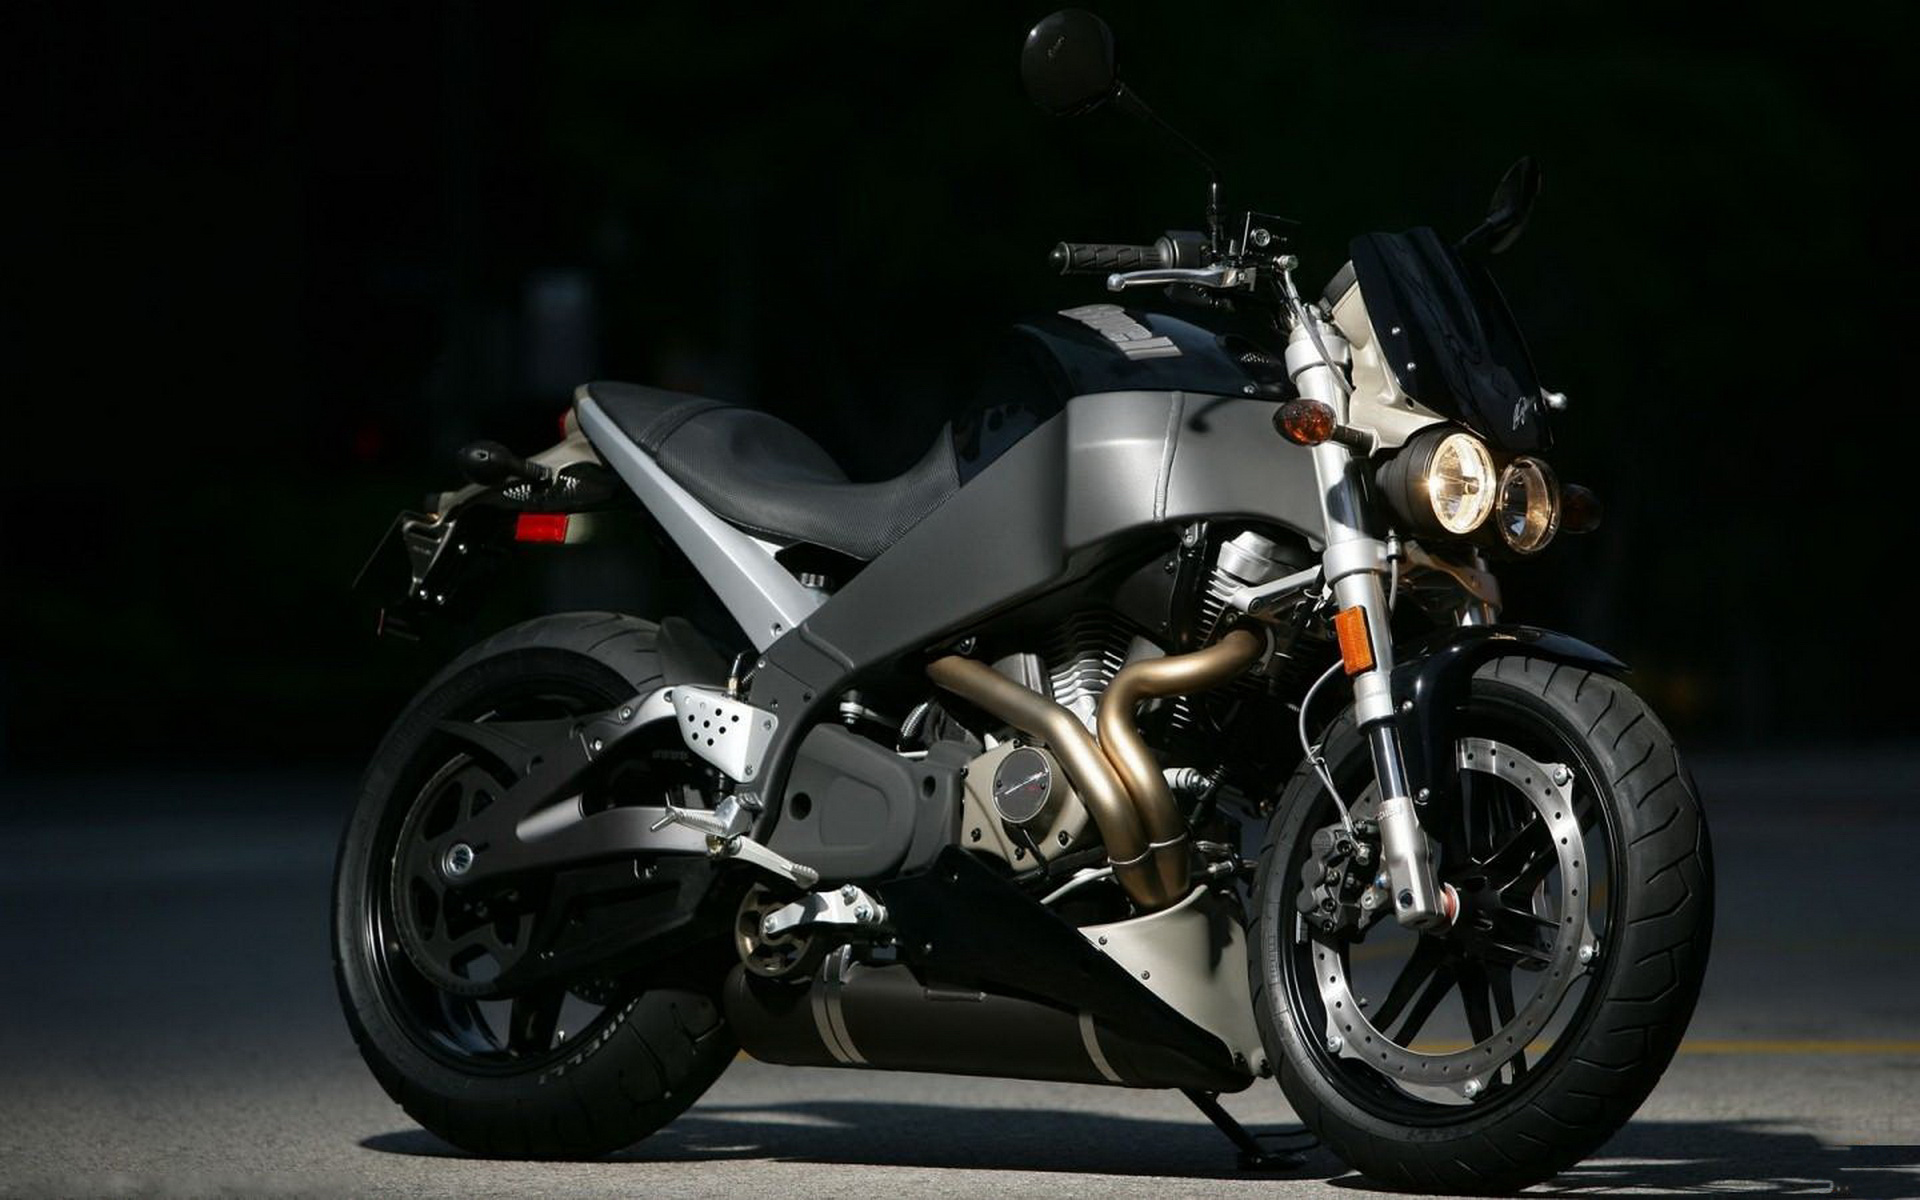 Popular Buell Image for Phone